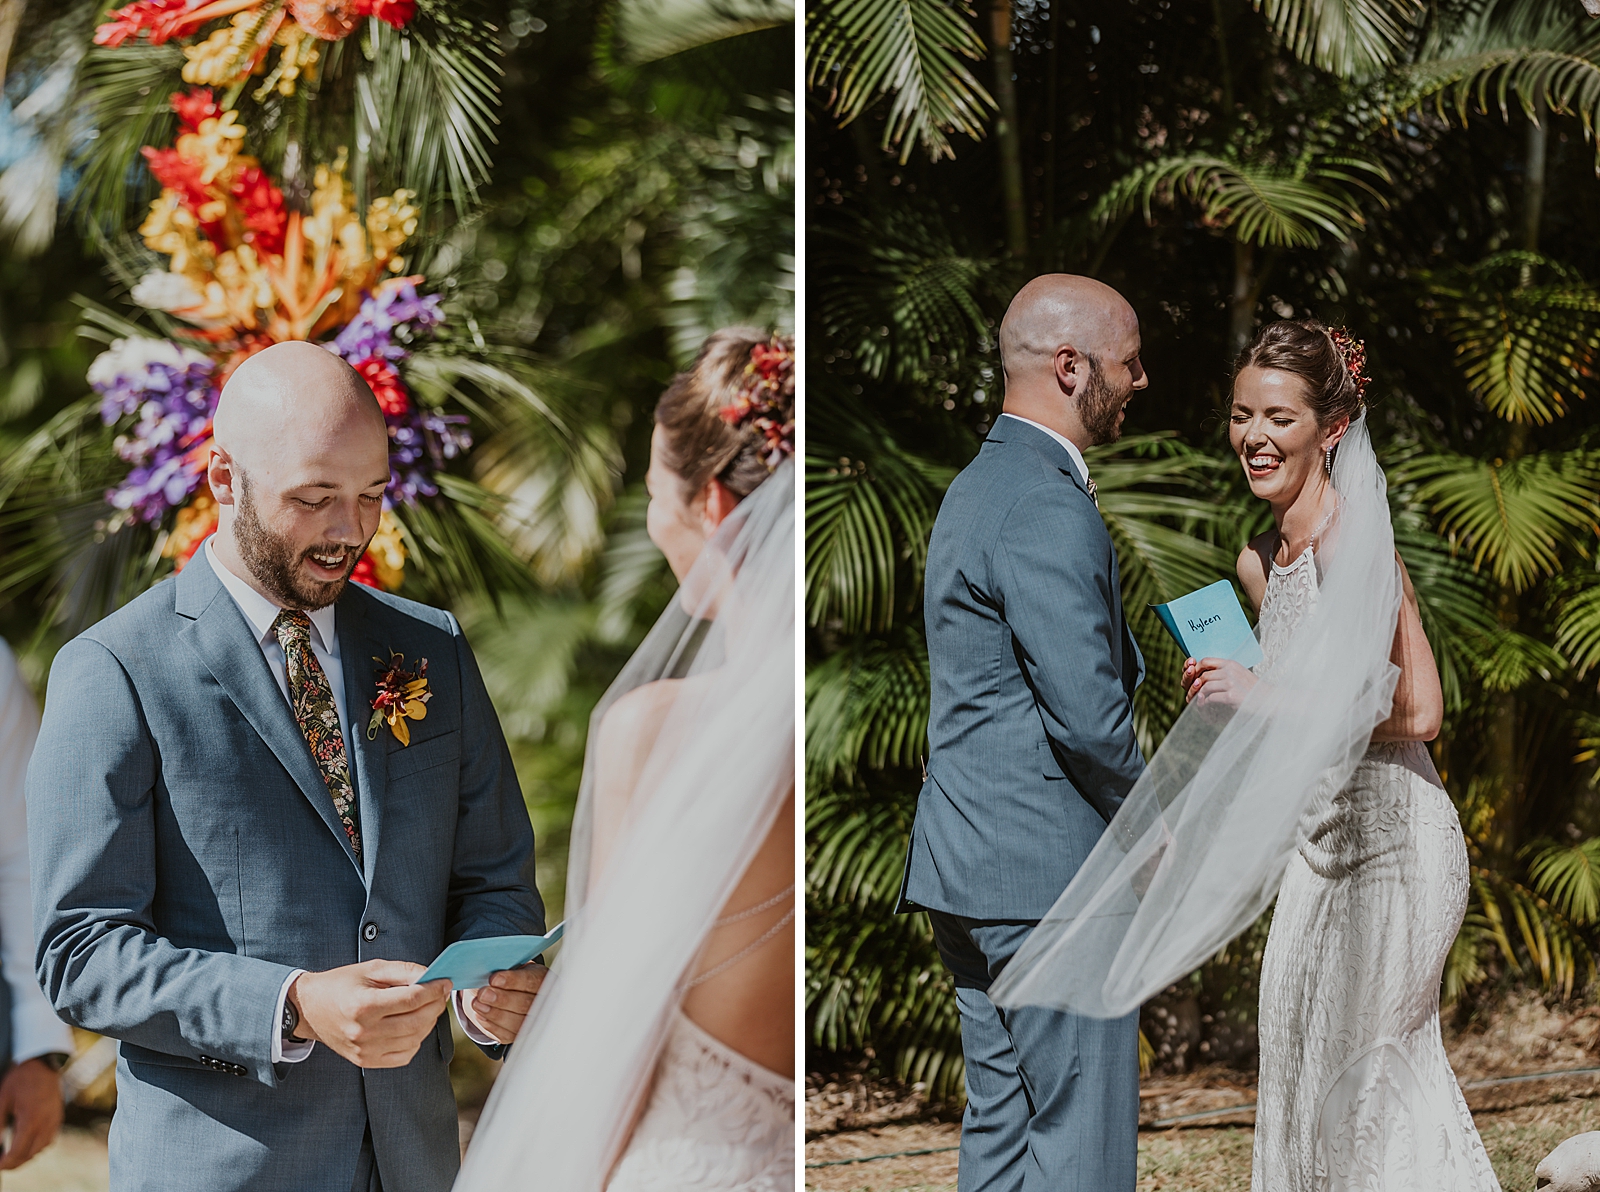 Bride and Groom giving vows and laughing together outside by tropical greenery Ceremony